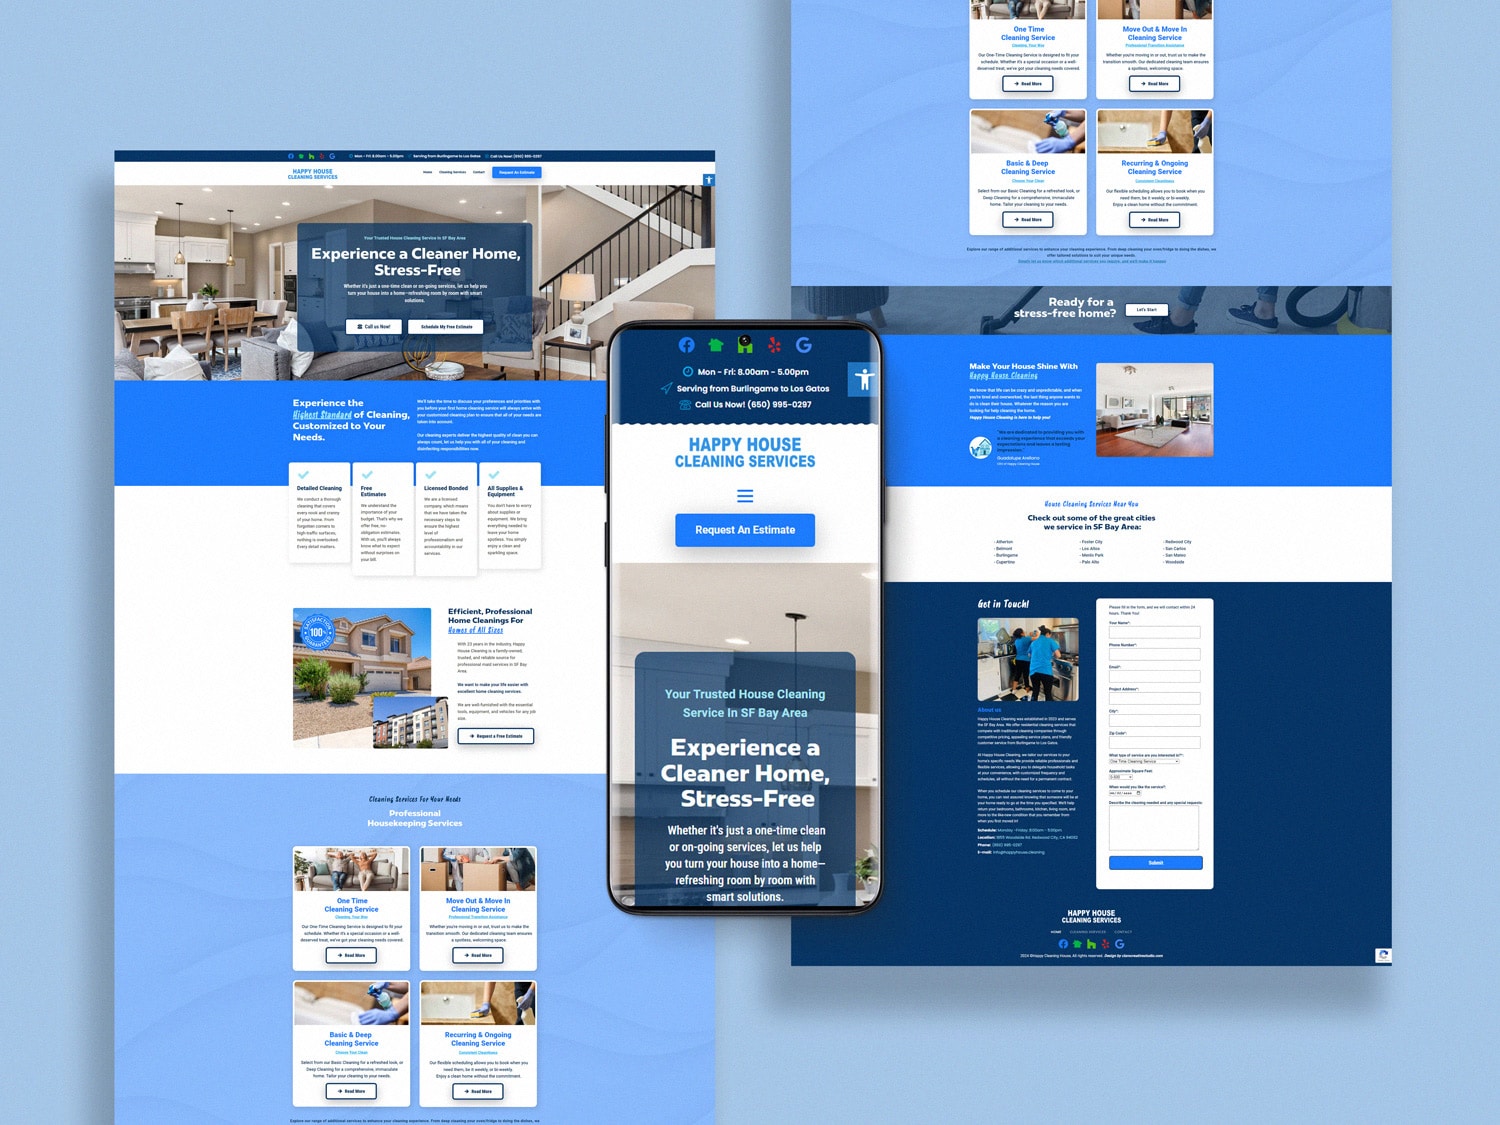 Mockup of Mobile-first web design adapted to all devices - Claro Creative Studio Small Business Branding and Website Design Agency in San Francisco California